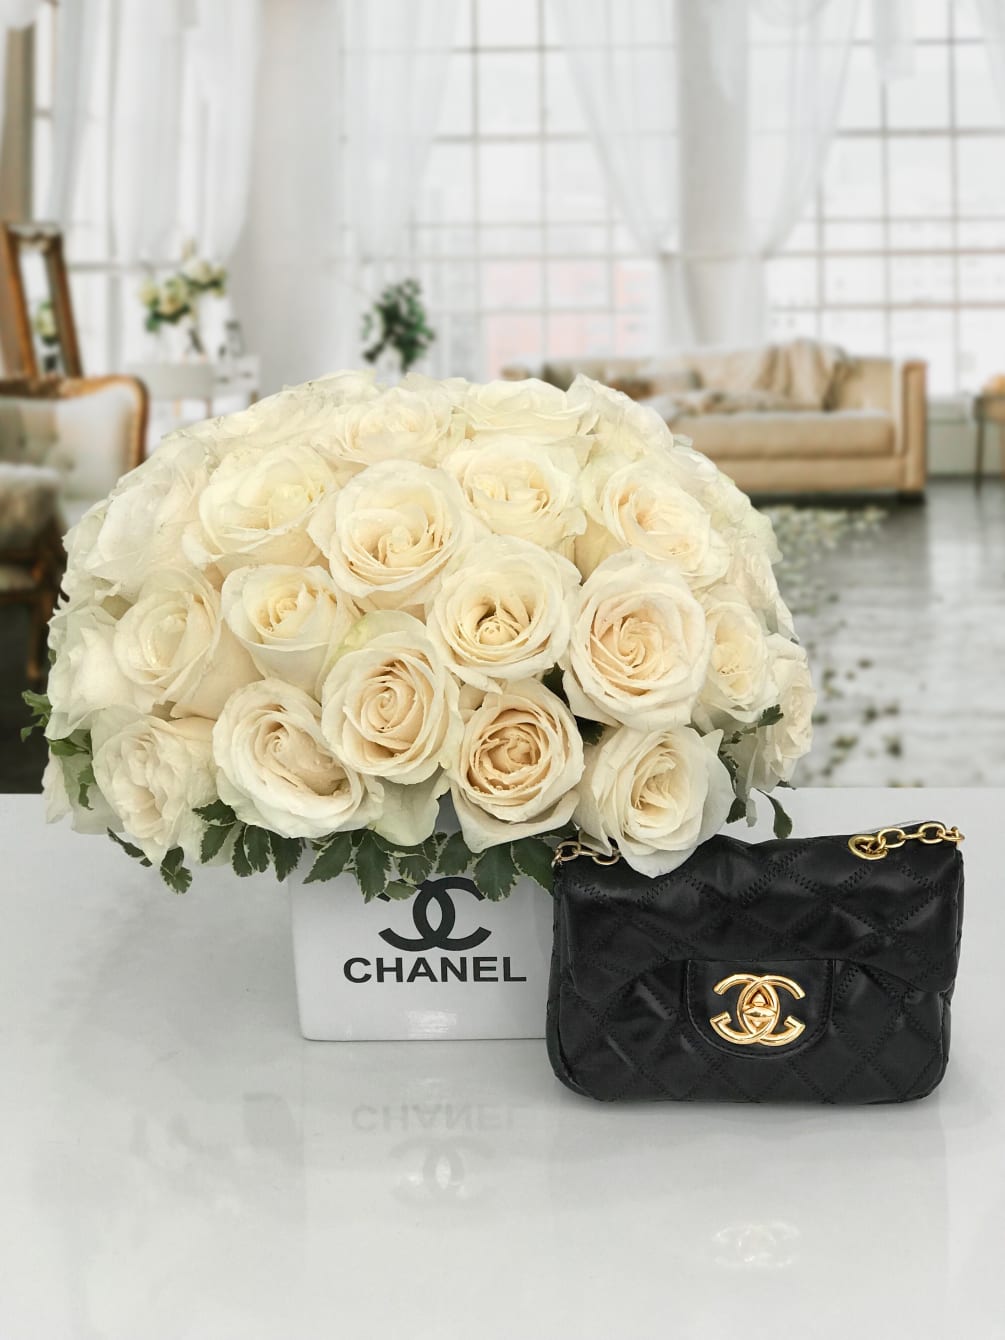 Too Chanel for You